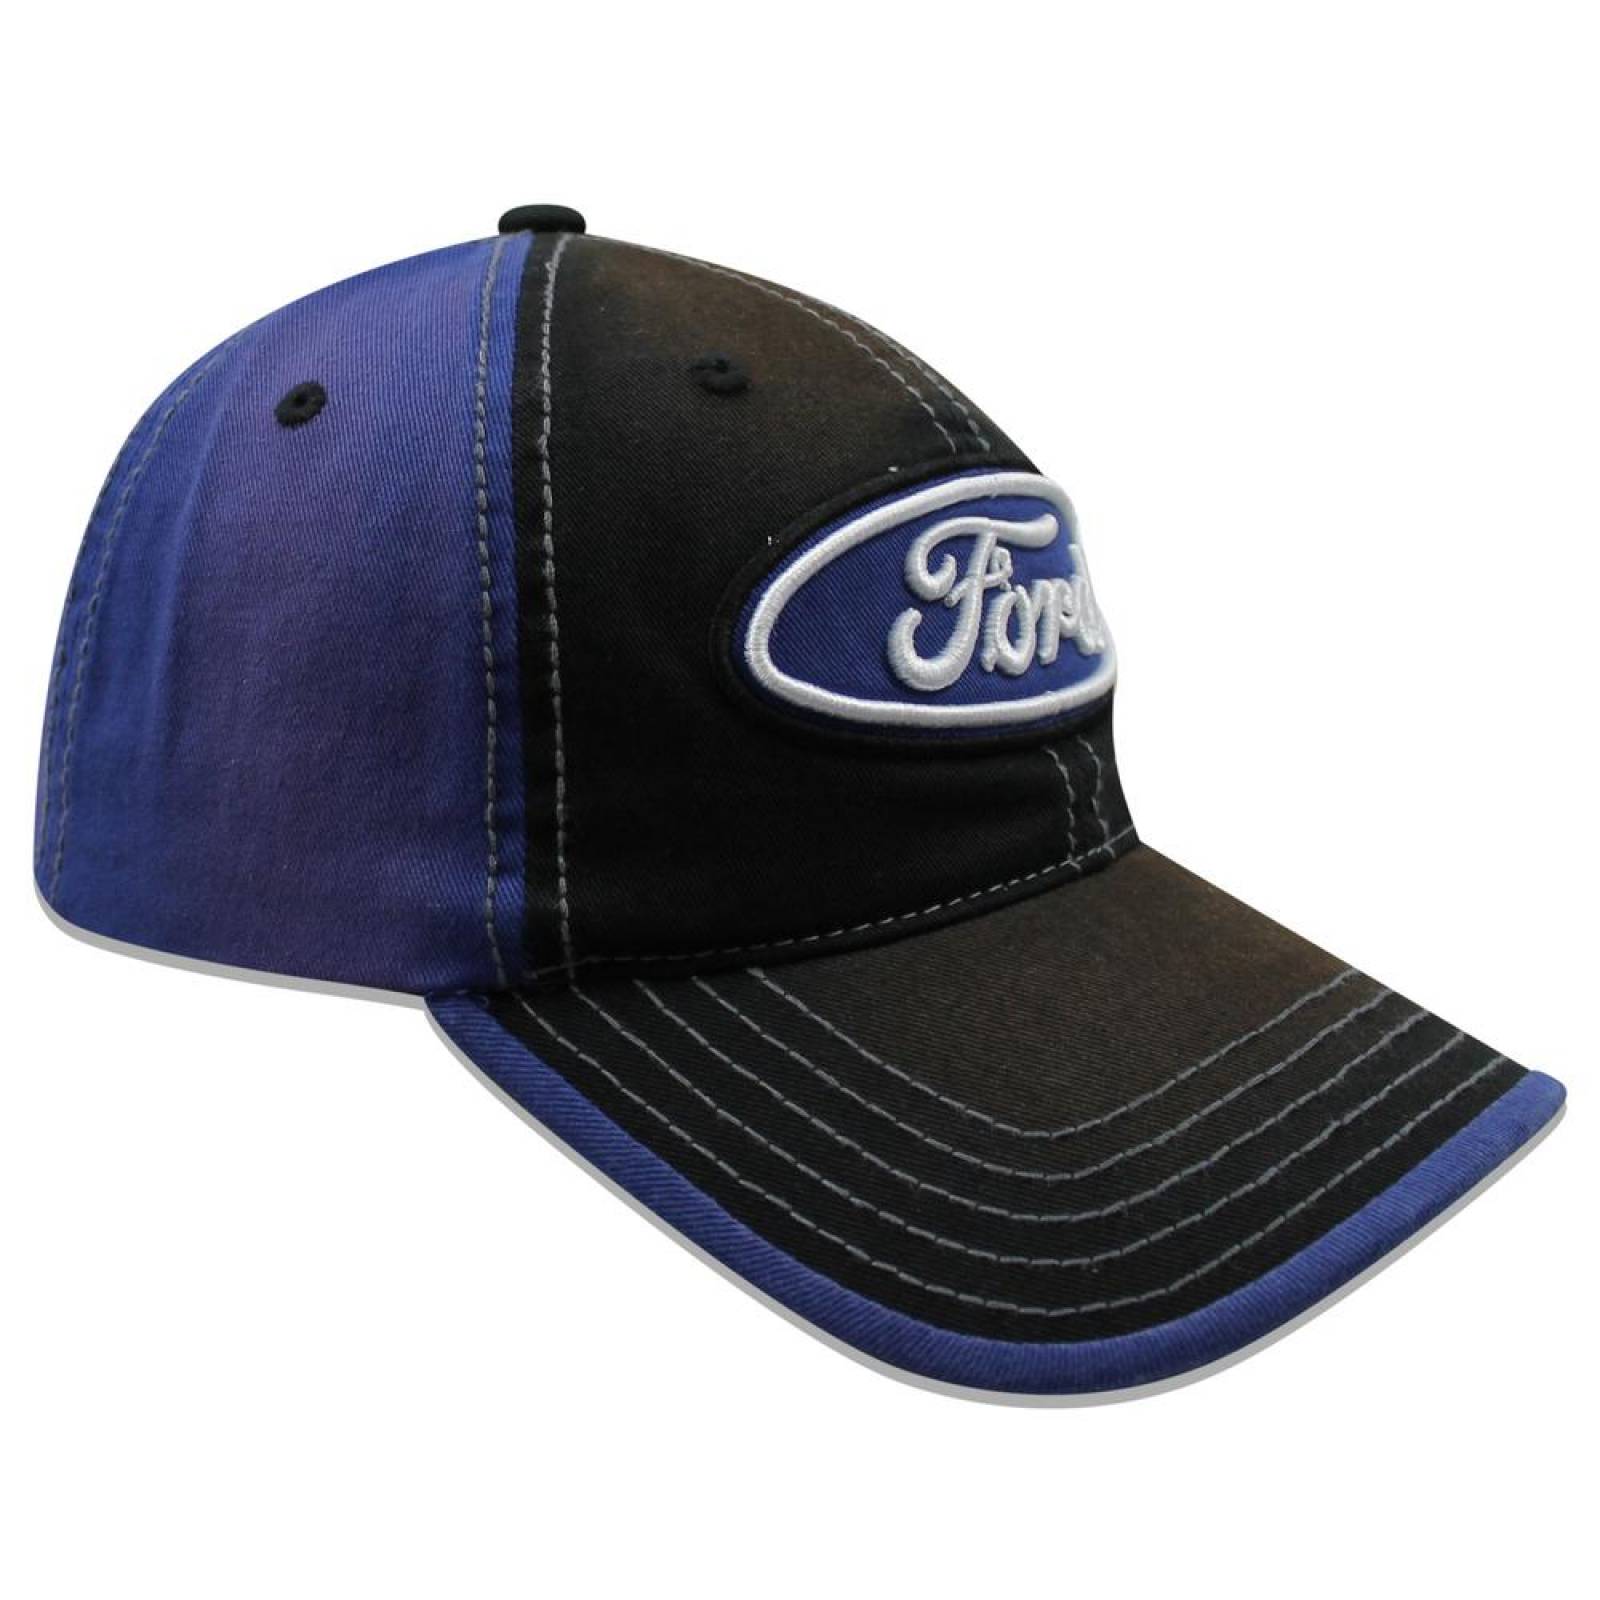 Gorra Concept One Ford Unconstructed Oval Negro 